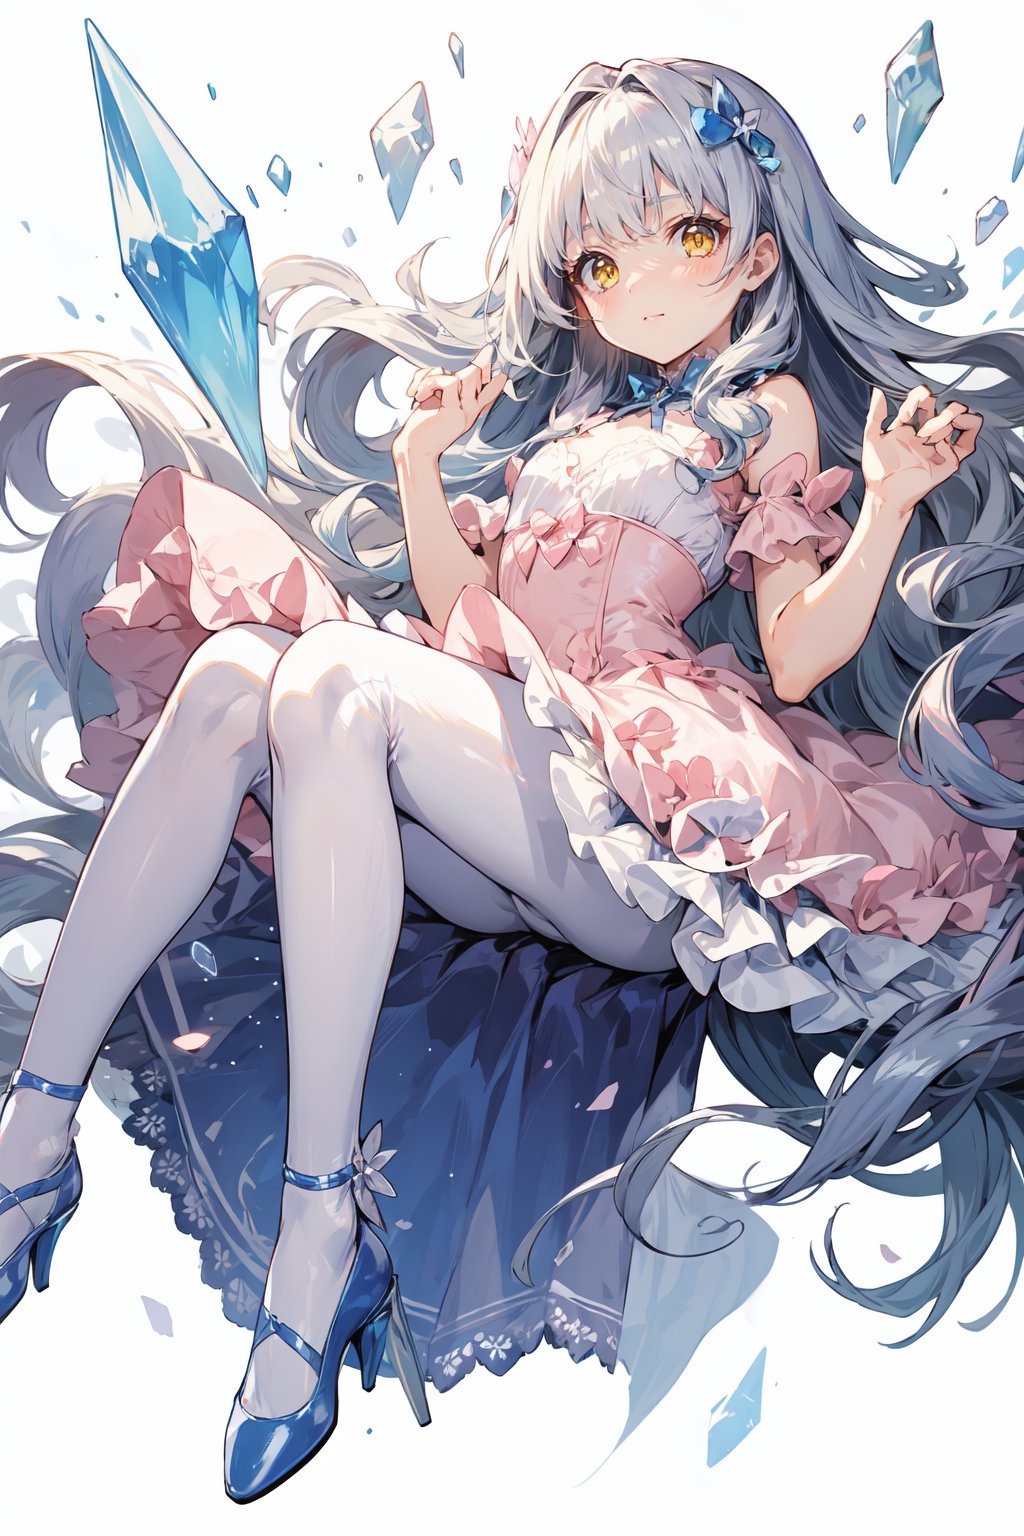 a cute girl wearing a pretty pink dress with ruffles and lace, white silk tights, blue crystal shoes, long straight white curly hair with bangs, yellow eyes.